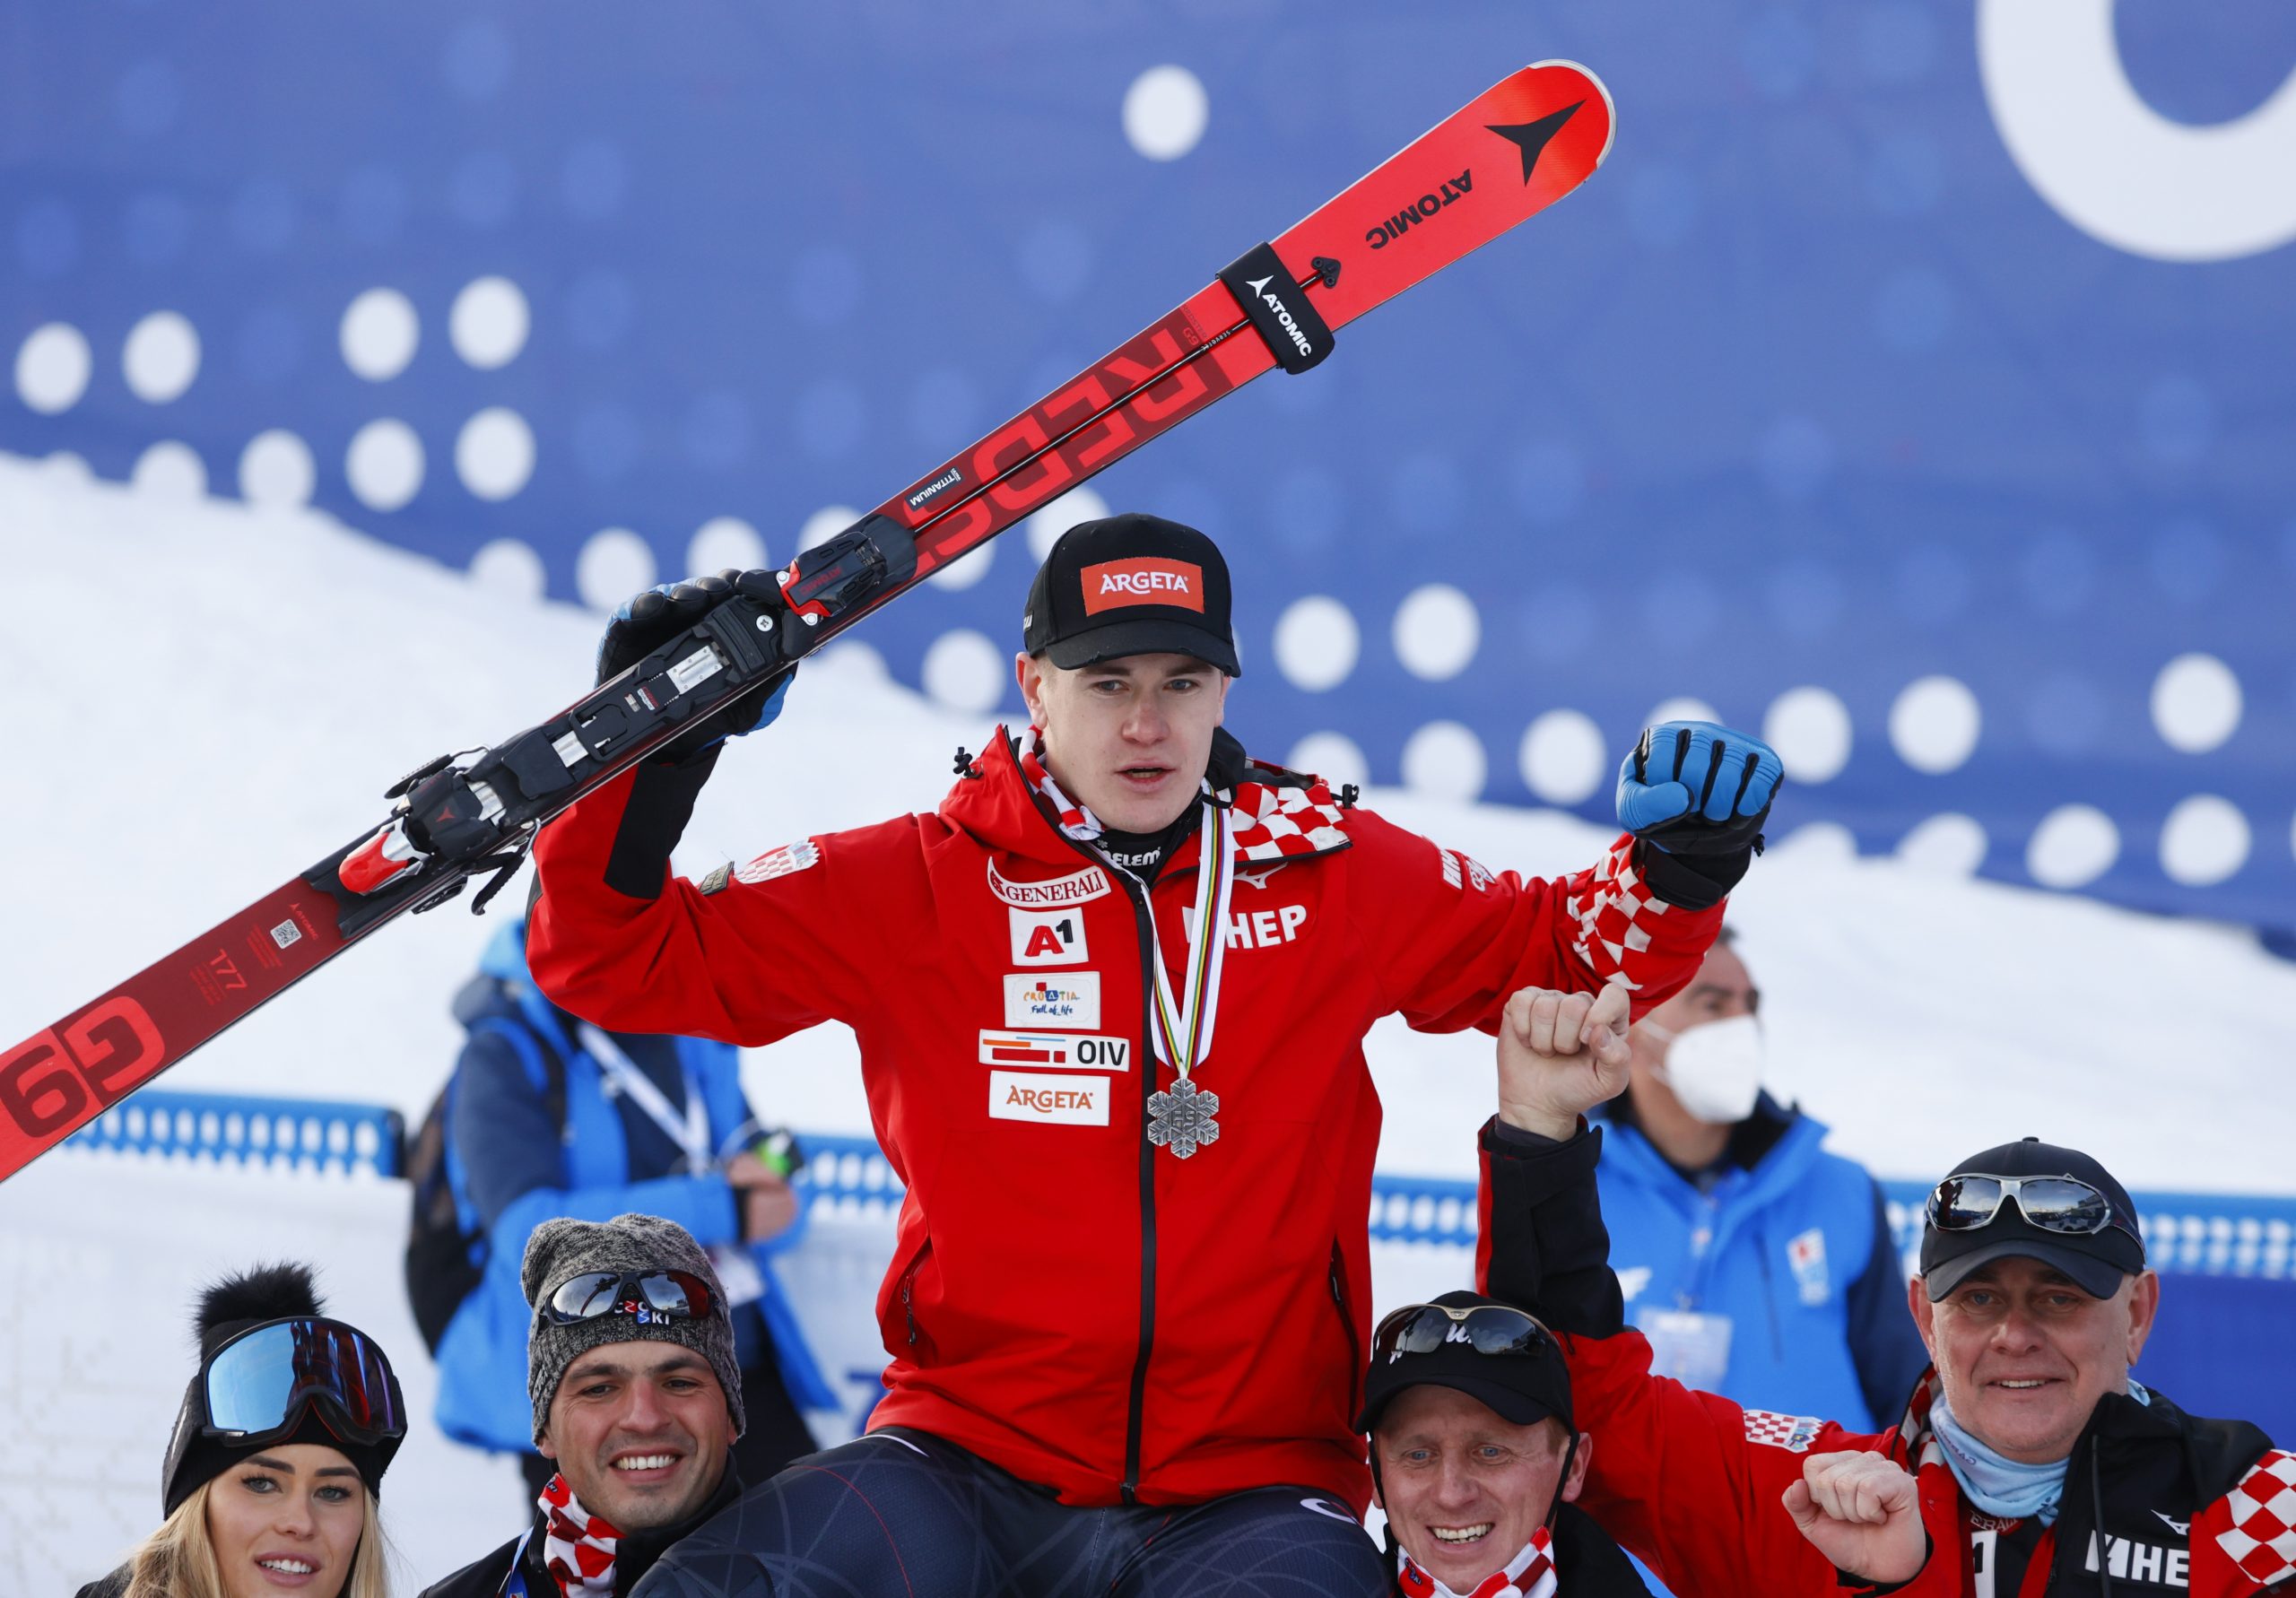 FIS Alpine World Ski Championships Alpine Skiing - FIS Alpine World Ski Championships - Cortina d'Ampezzo, Italy - February 16, 2021 Croatia's Filip Zubcic celebrates with the silver medal and his team after finishing second in the men's parallel REUTERS/Denis Balibouse DENIS BALIBOUSE